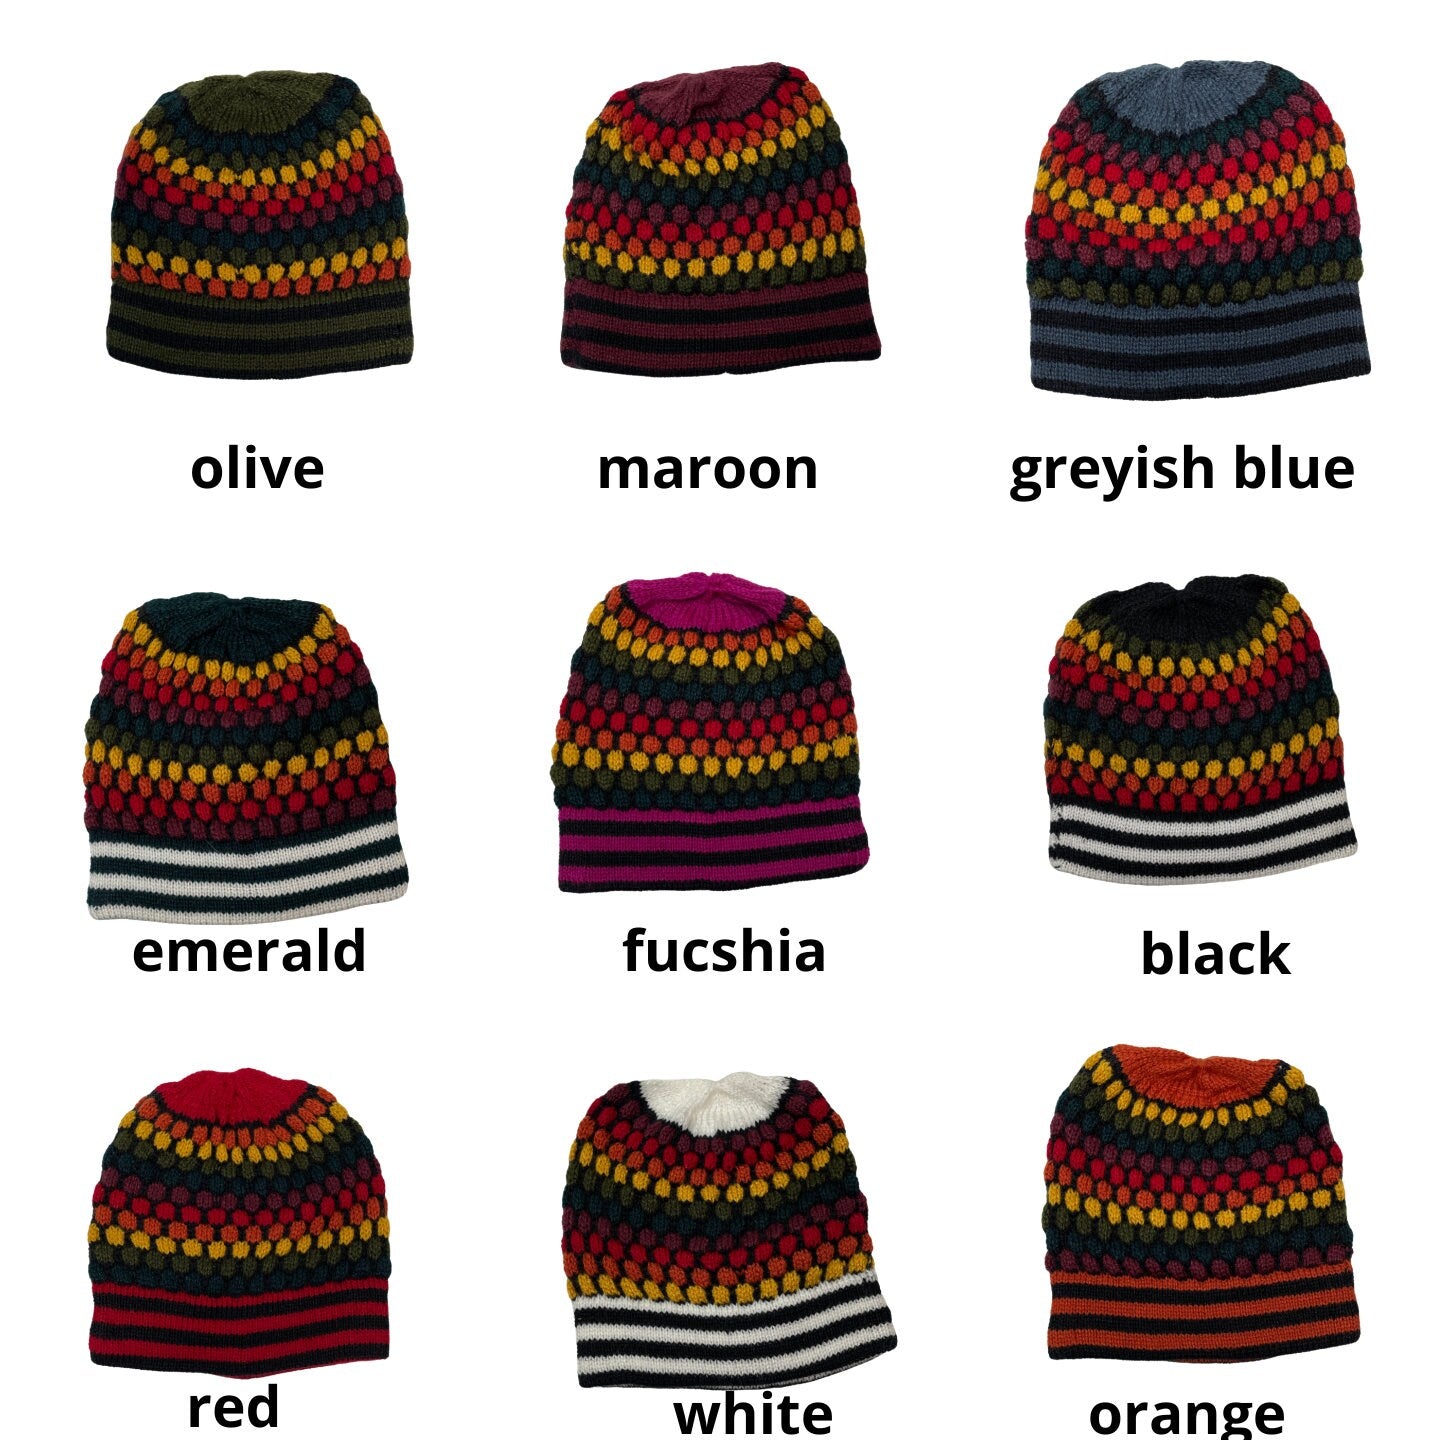 Colorful Knitted Alpaca Beanie Hat One Size